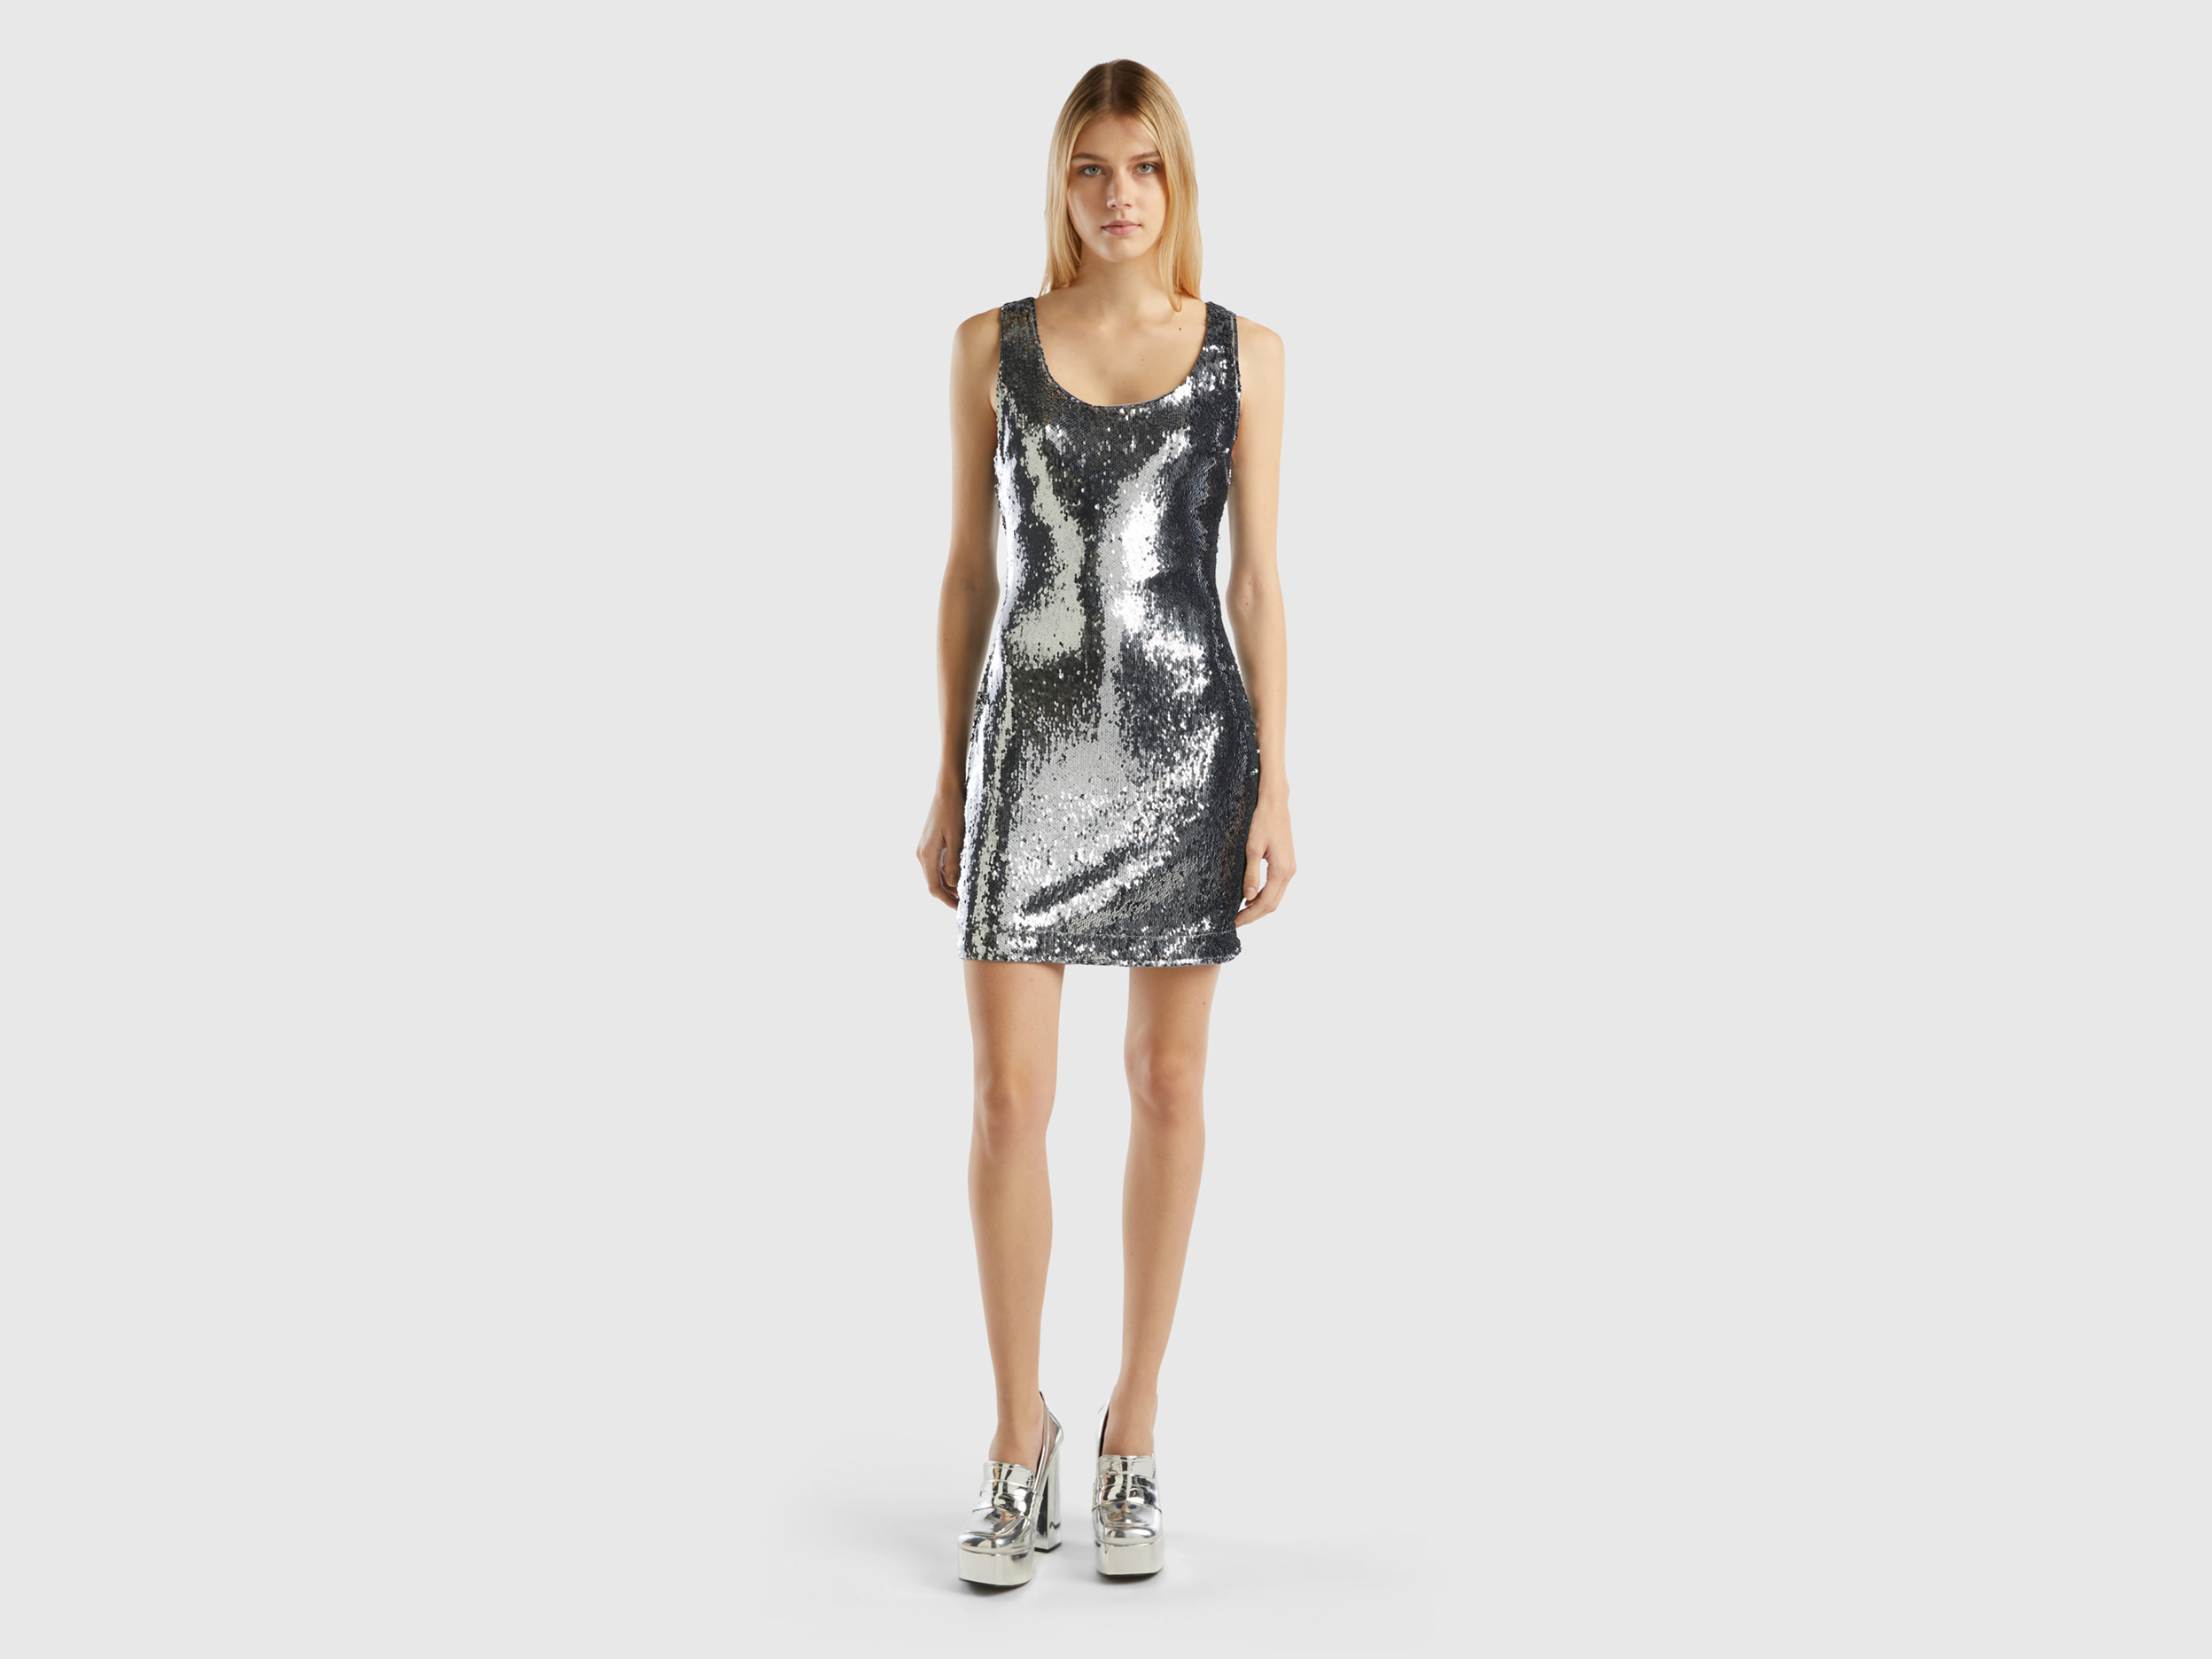 Benetton, Sheath Dress With Sequins, size M, Silver, Women